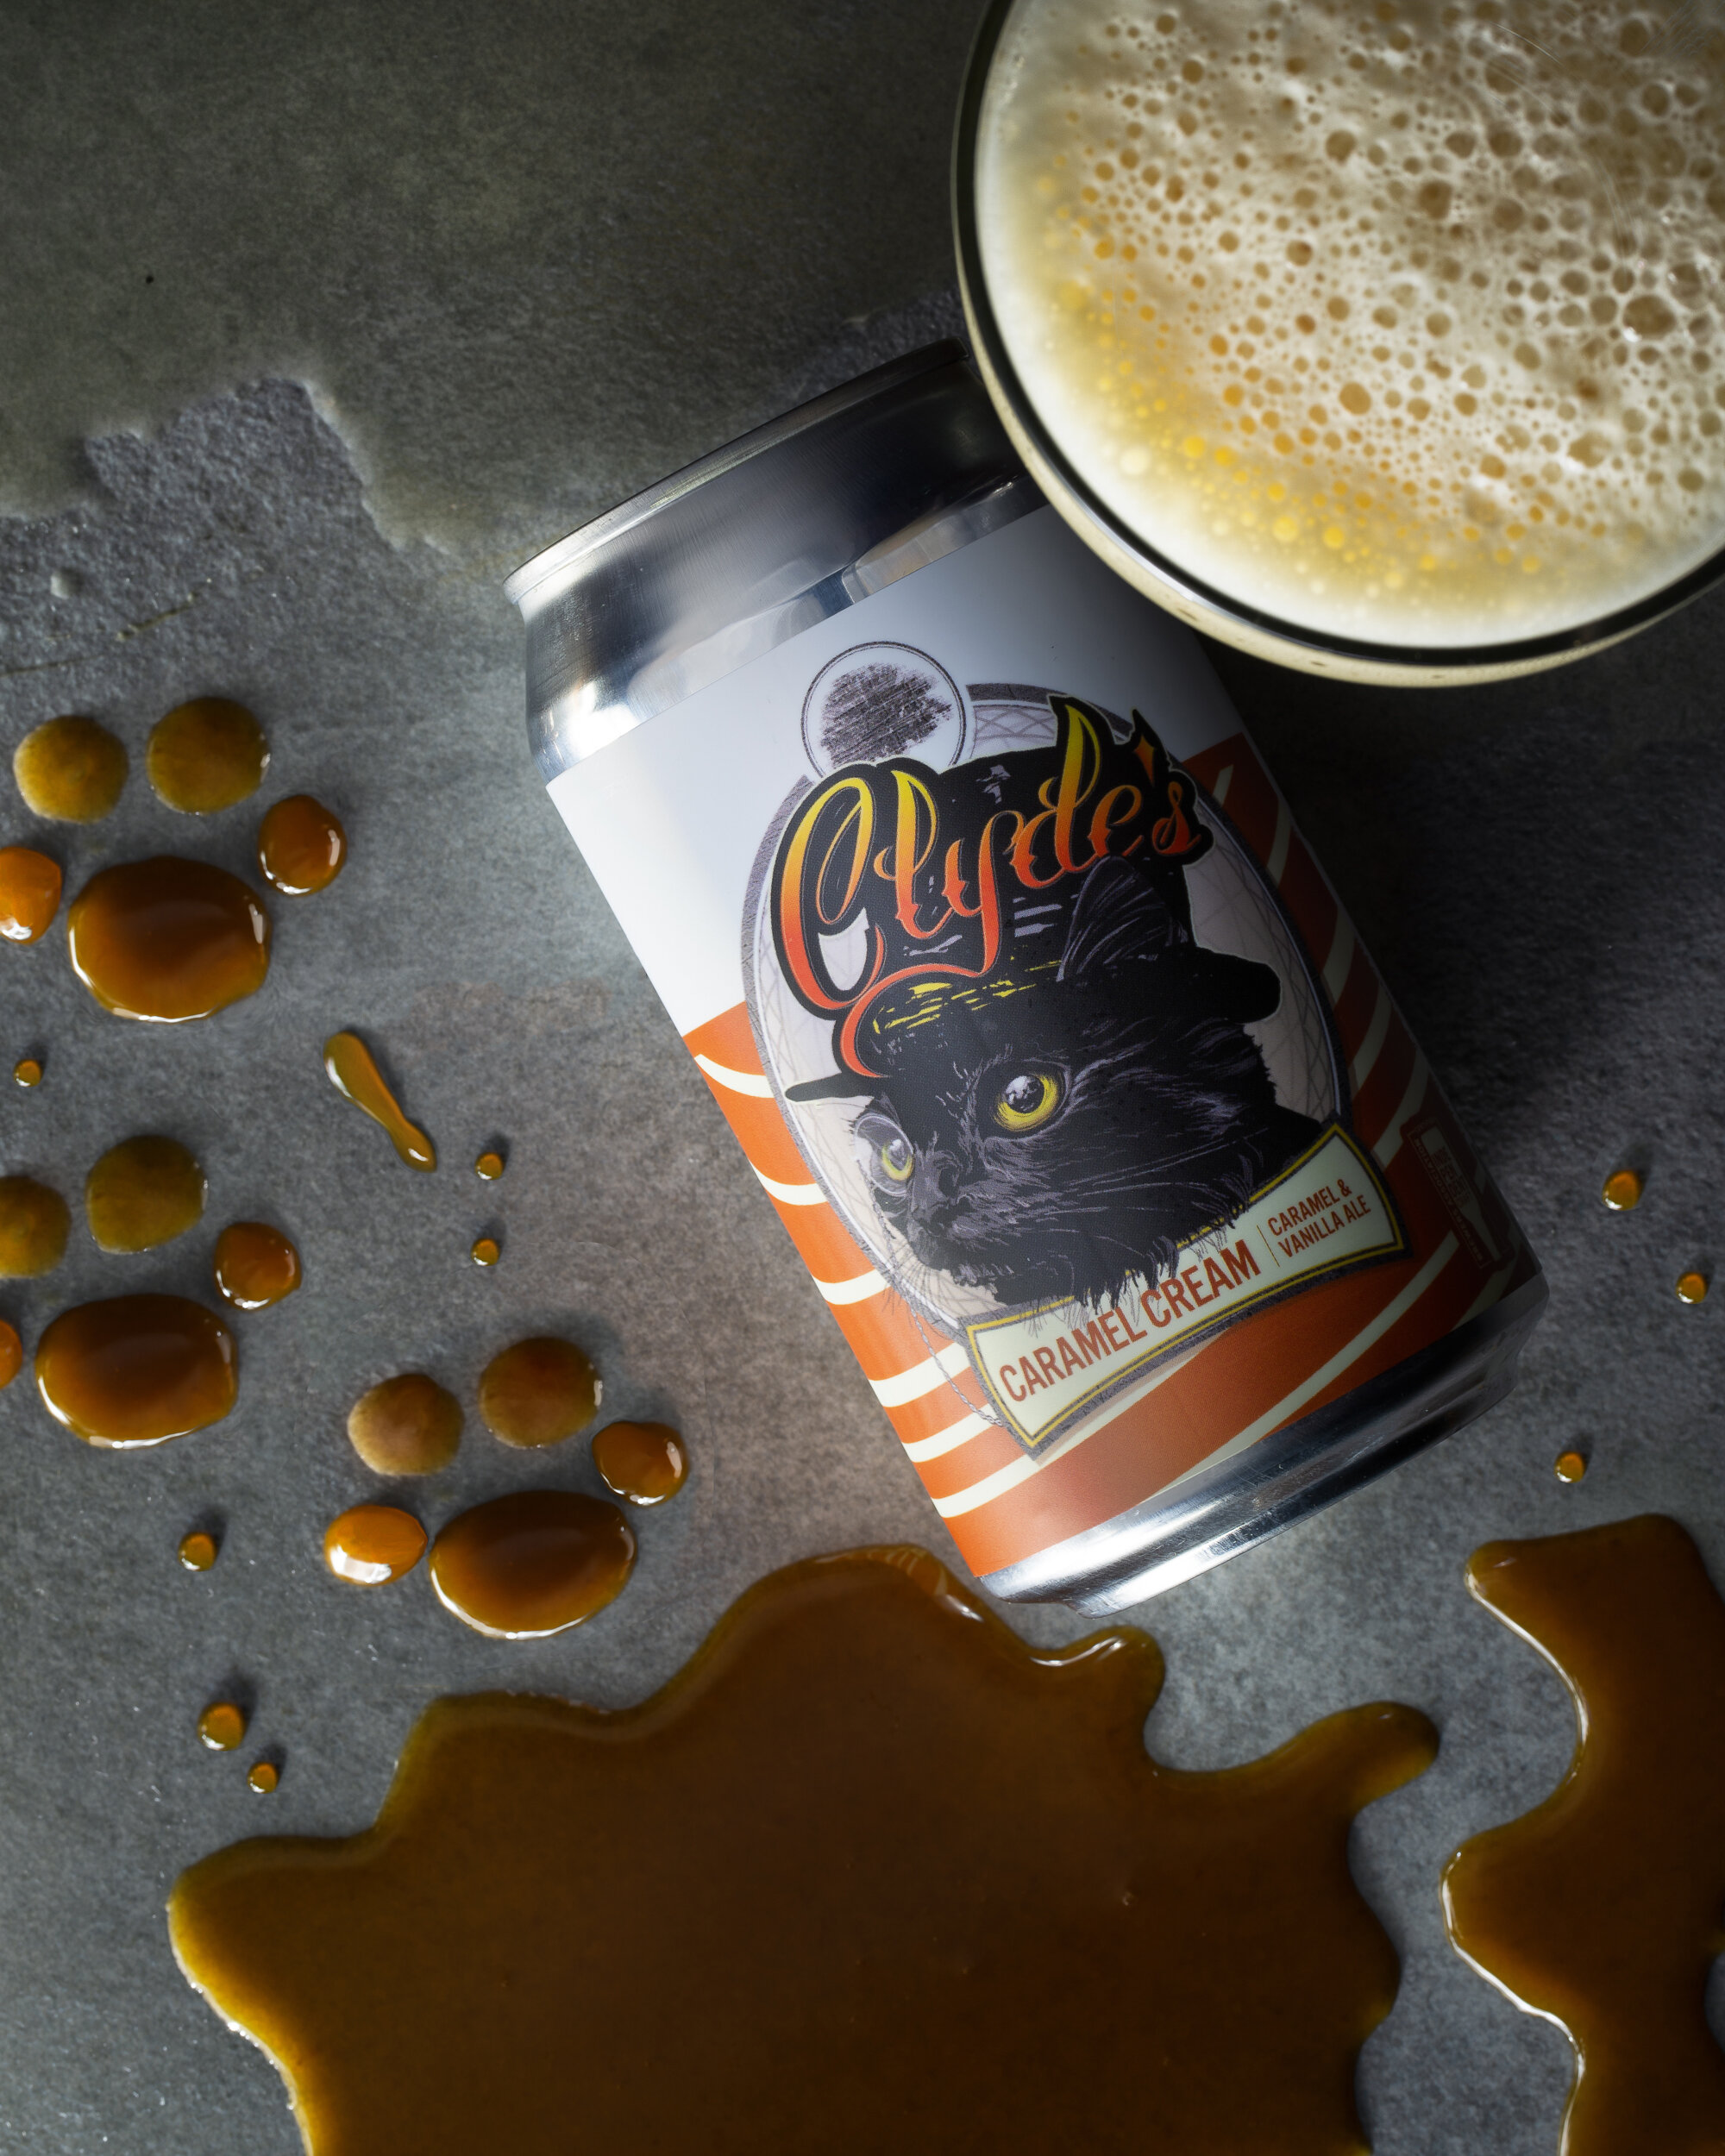 Clydes Cream Ale product photo.jpg